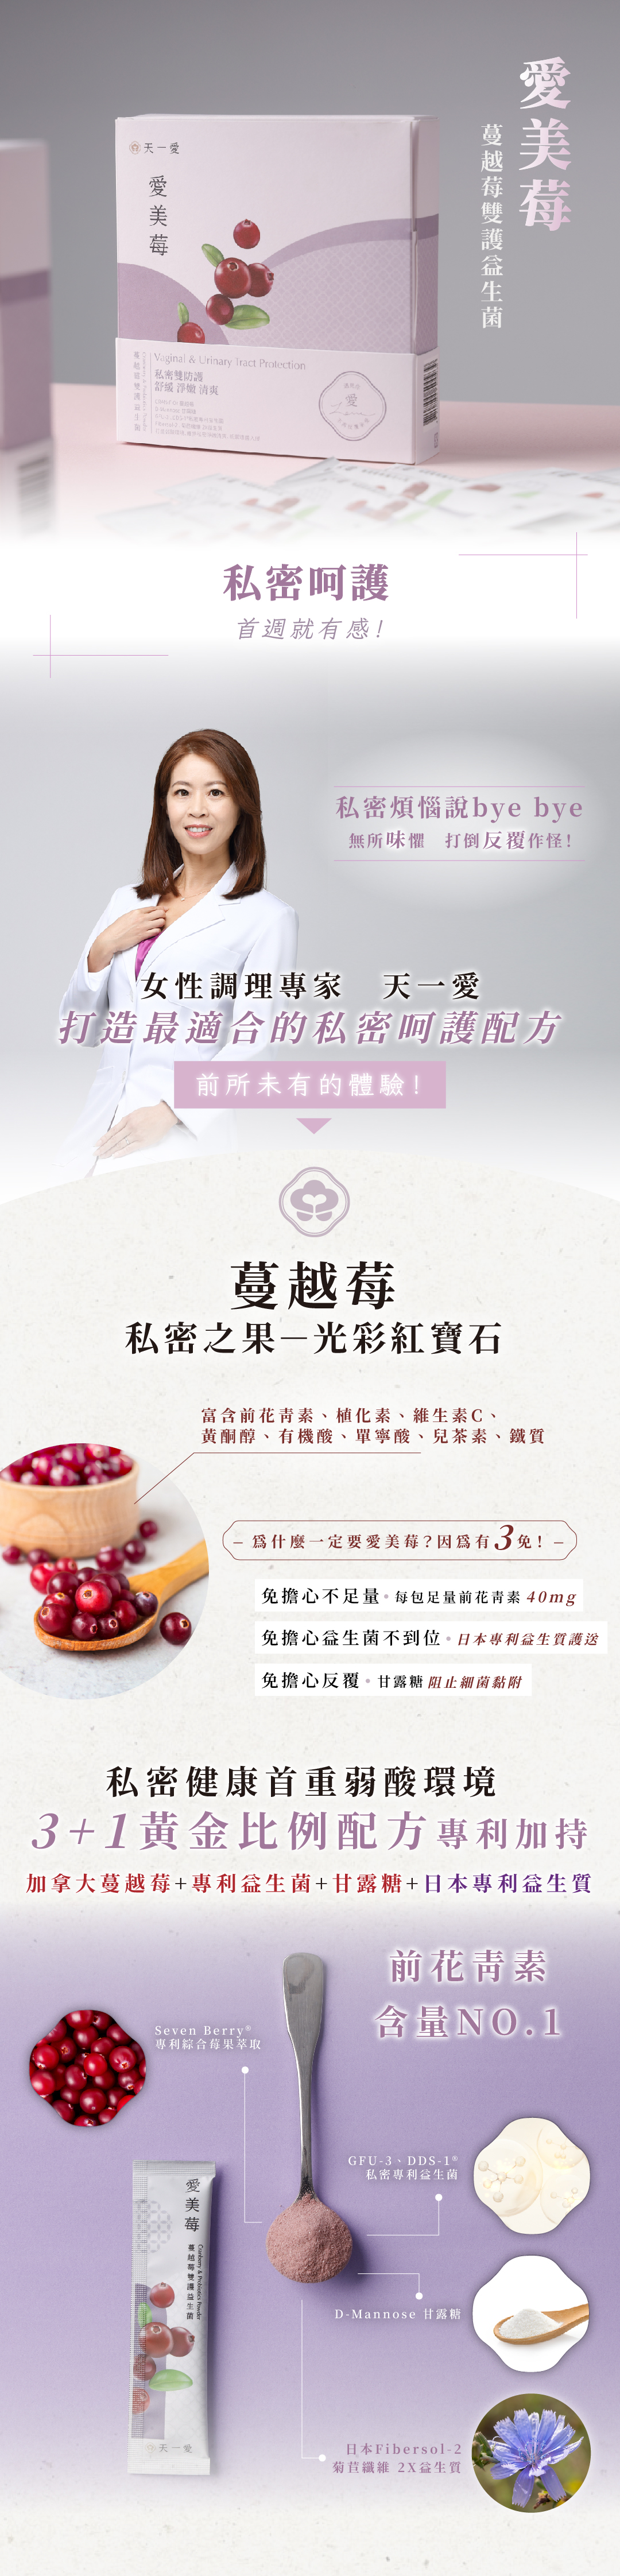 Tianyi Ai [Aimei Berry] cranberry dual-protection probiotic is used to adjust the dual-path protection during lochia, and protect the private dual-path health from the inside out. It is suitable for natural postpartum, drug, and surgical abortion.